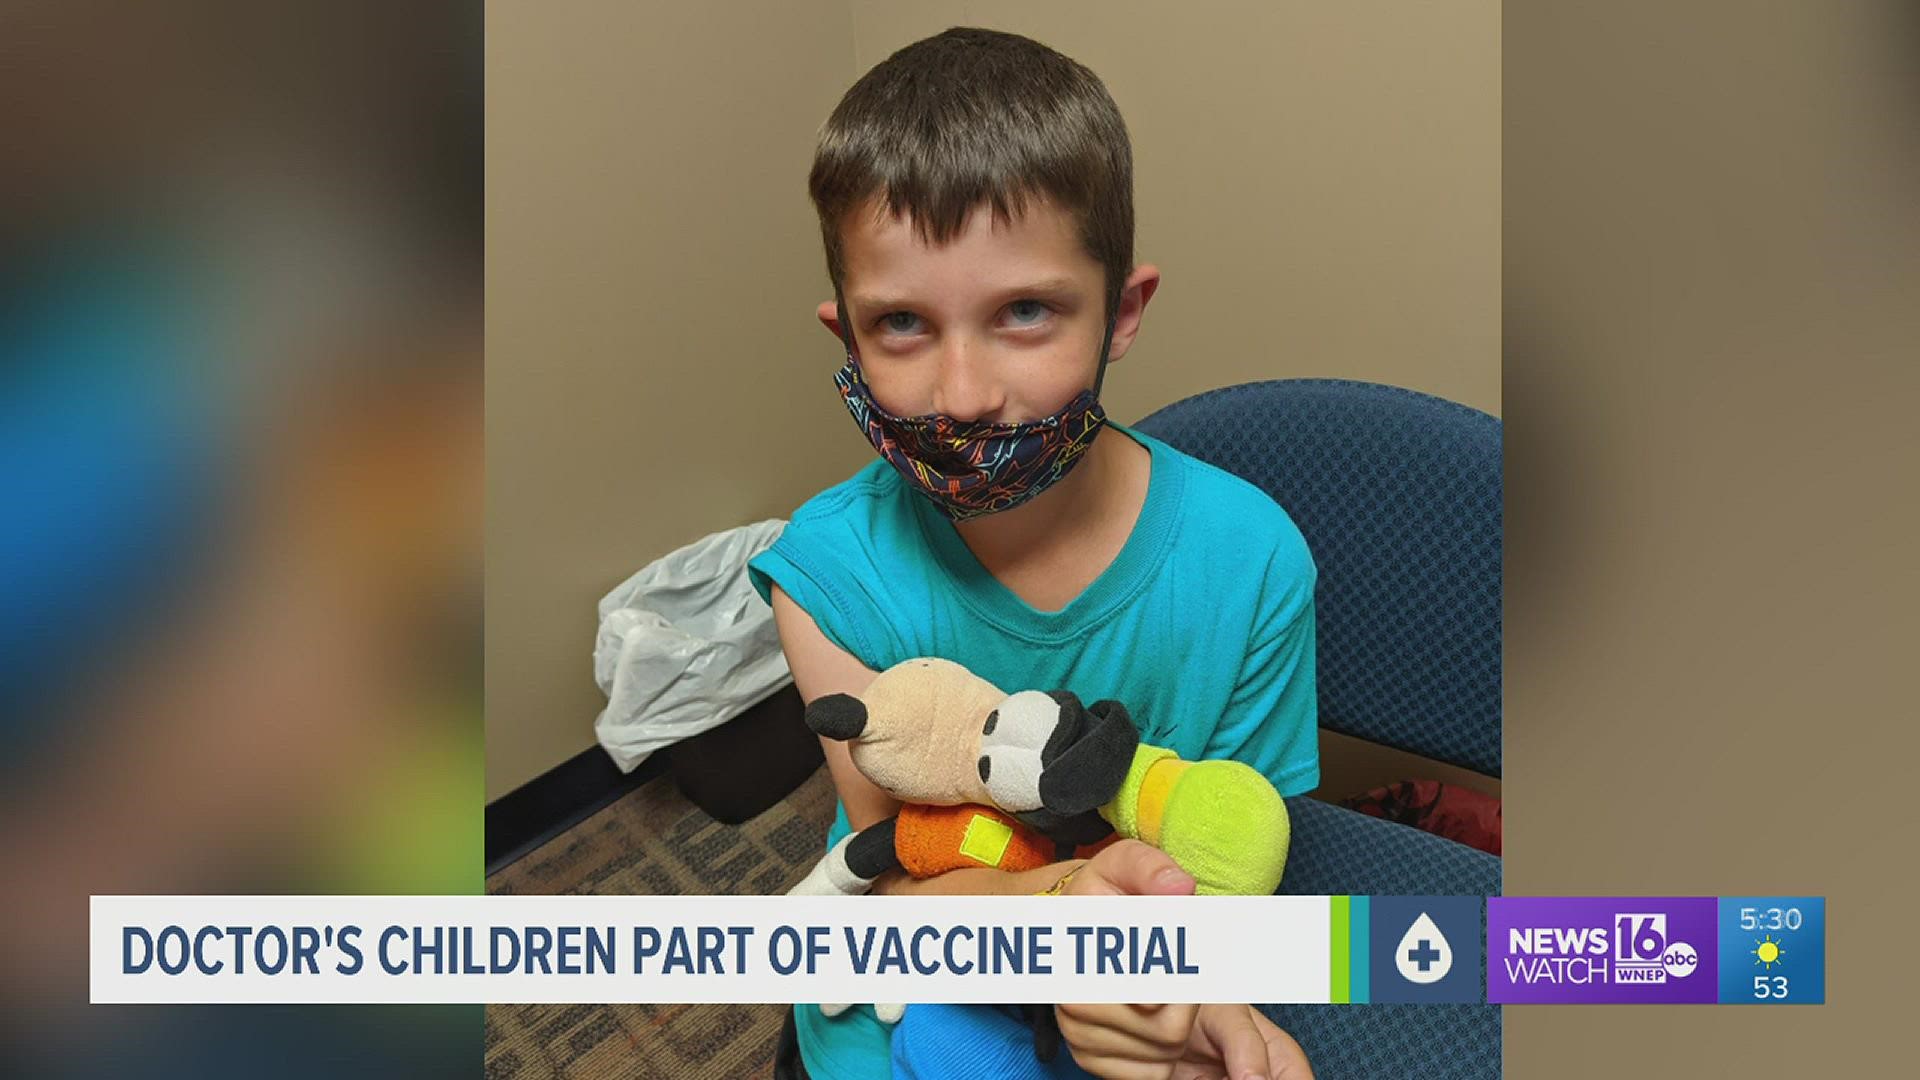 The doctor's kids were part of Moderna's vaccine trial.